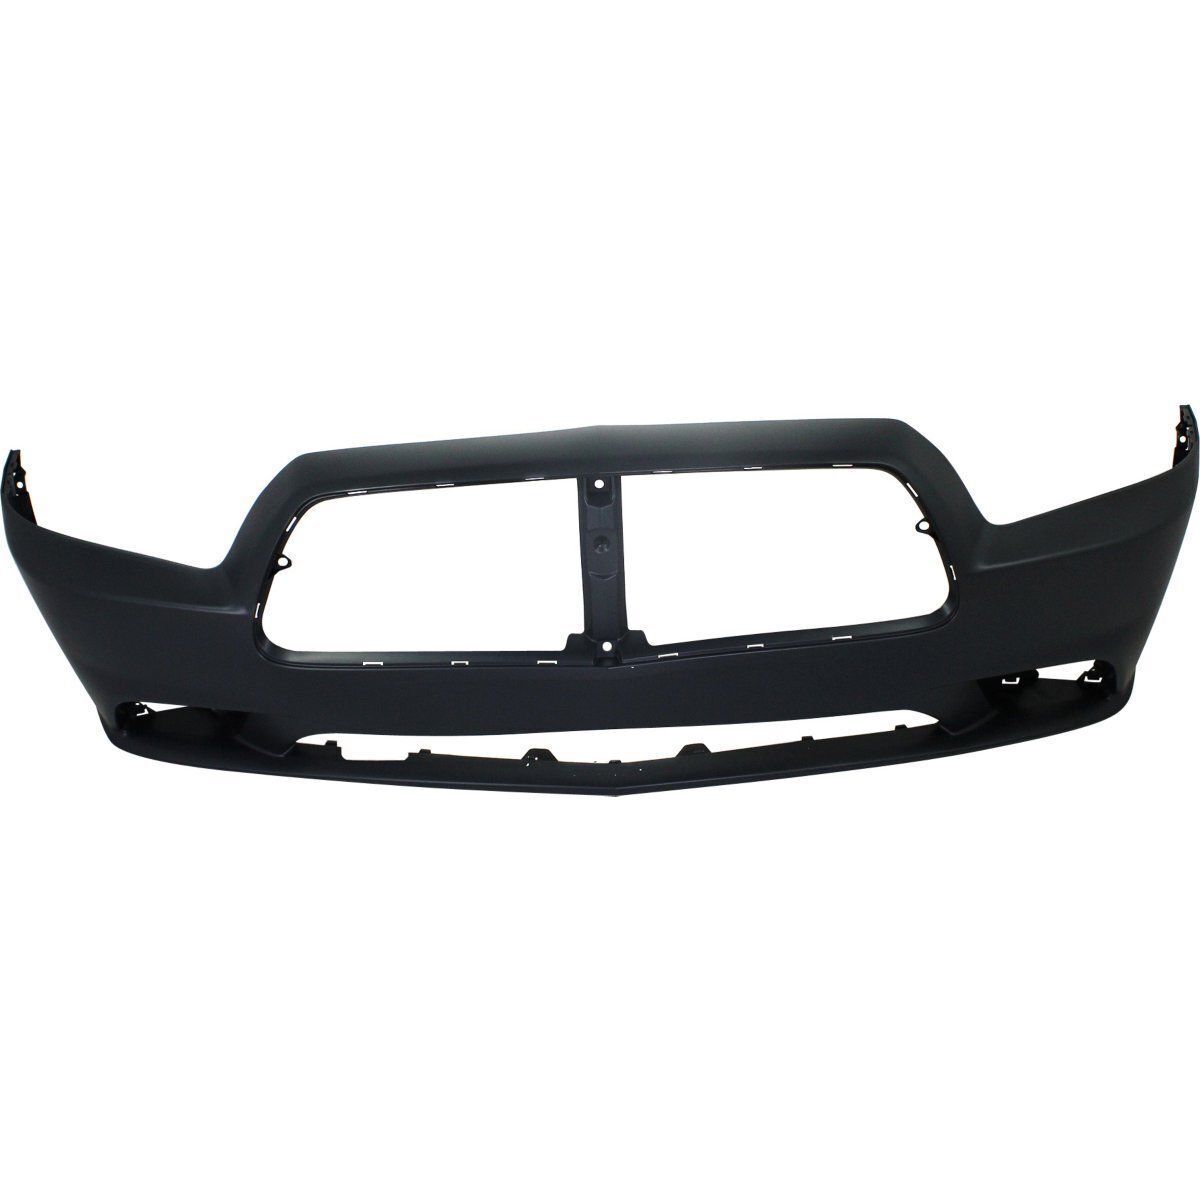 Front Bumper Cover For 2011-2014 Dodge Charger R/T/SE/SXT w/ Cruise Control CAPA